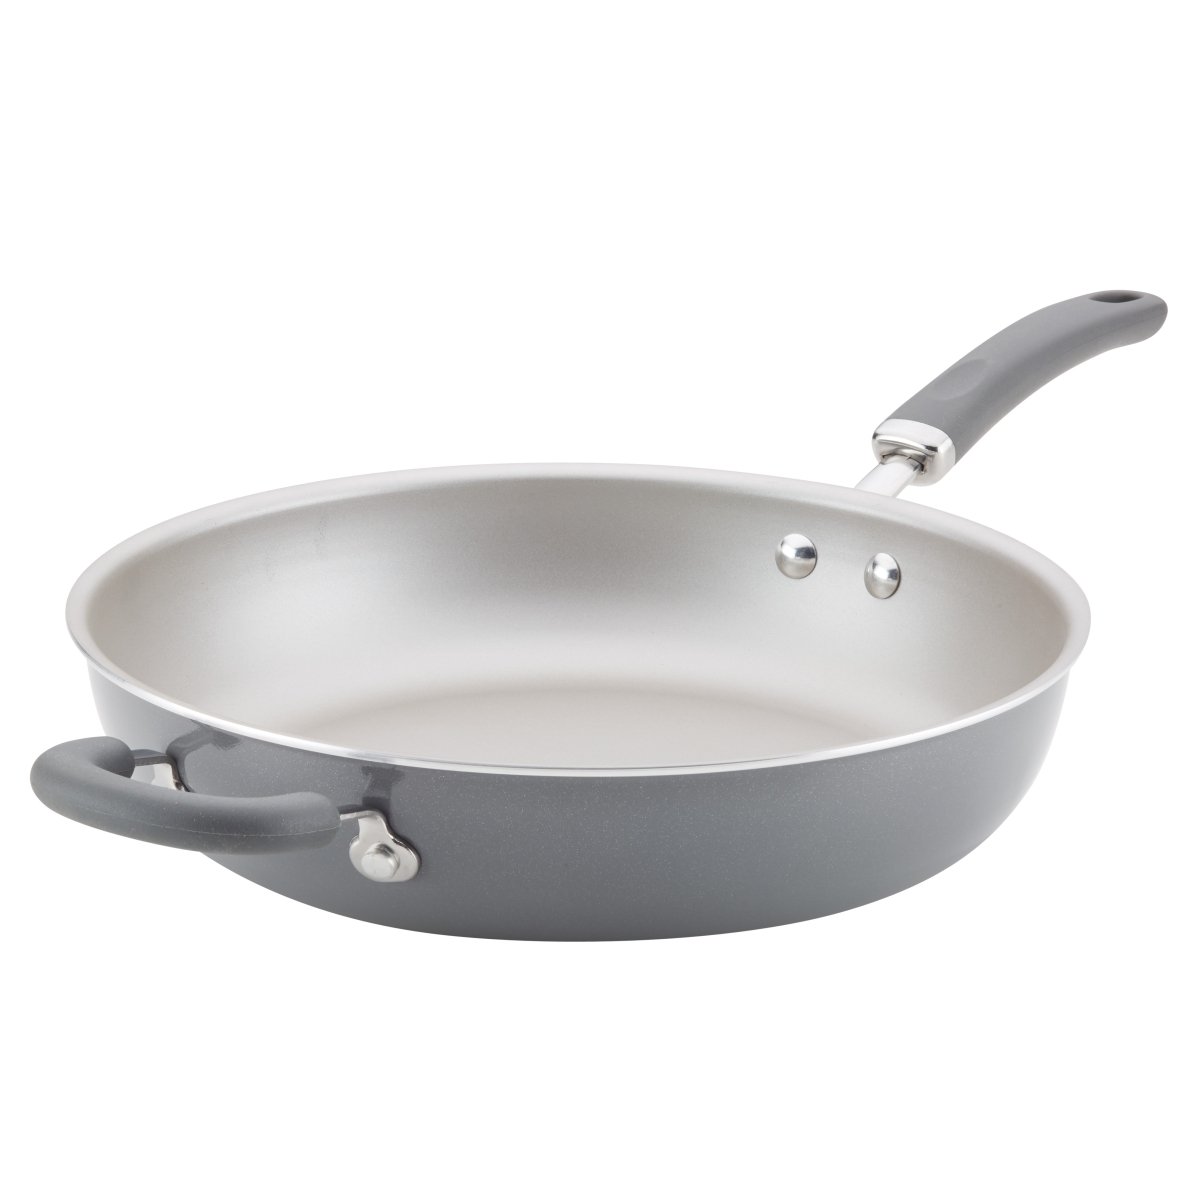 12006 Create Delicious Aluminum Nonstick Deep Skillet, 12.5 In. - Gray Shimmer